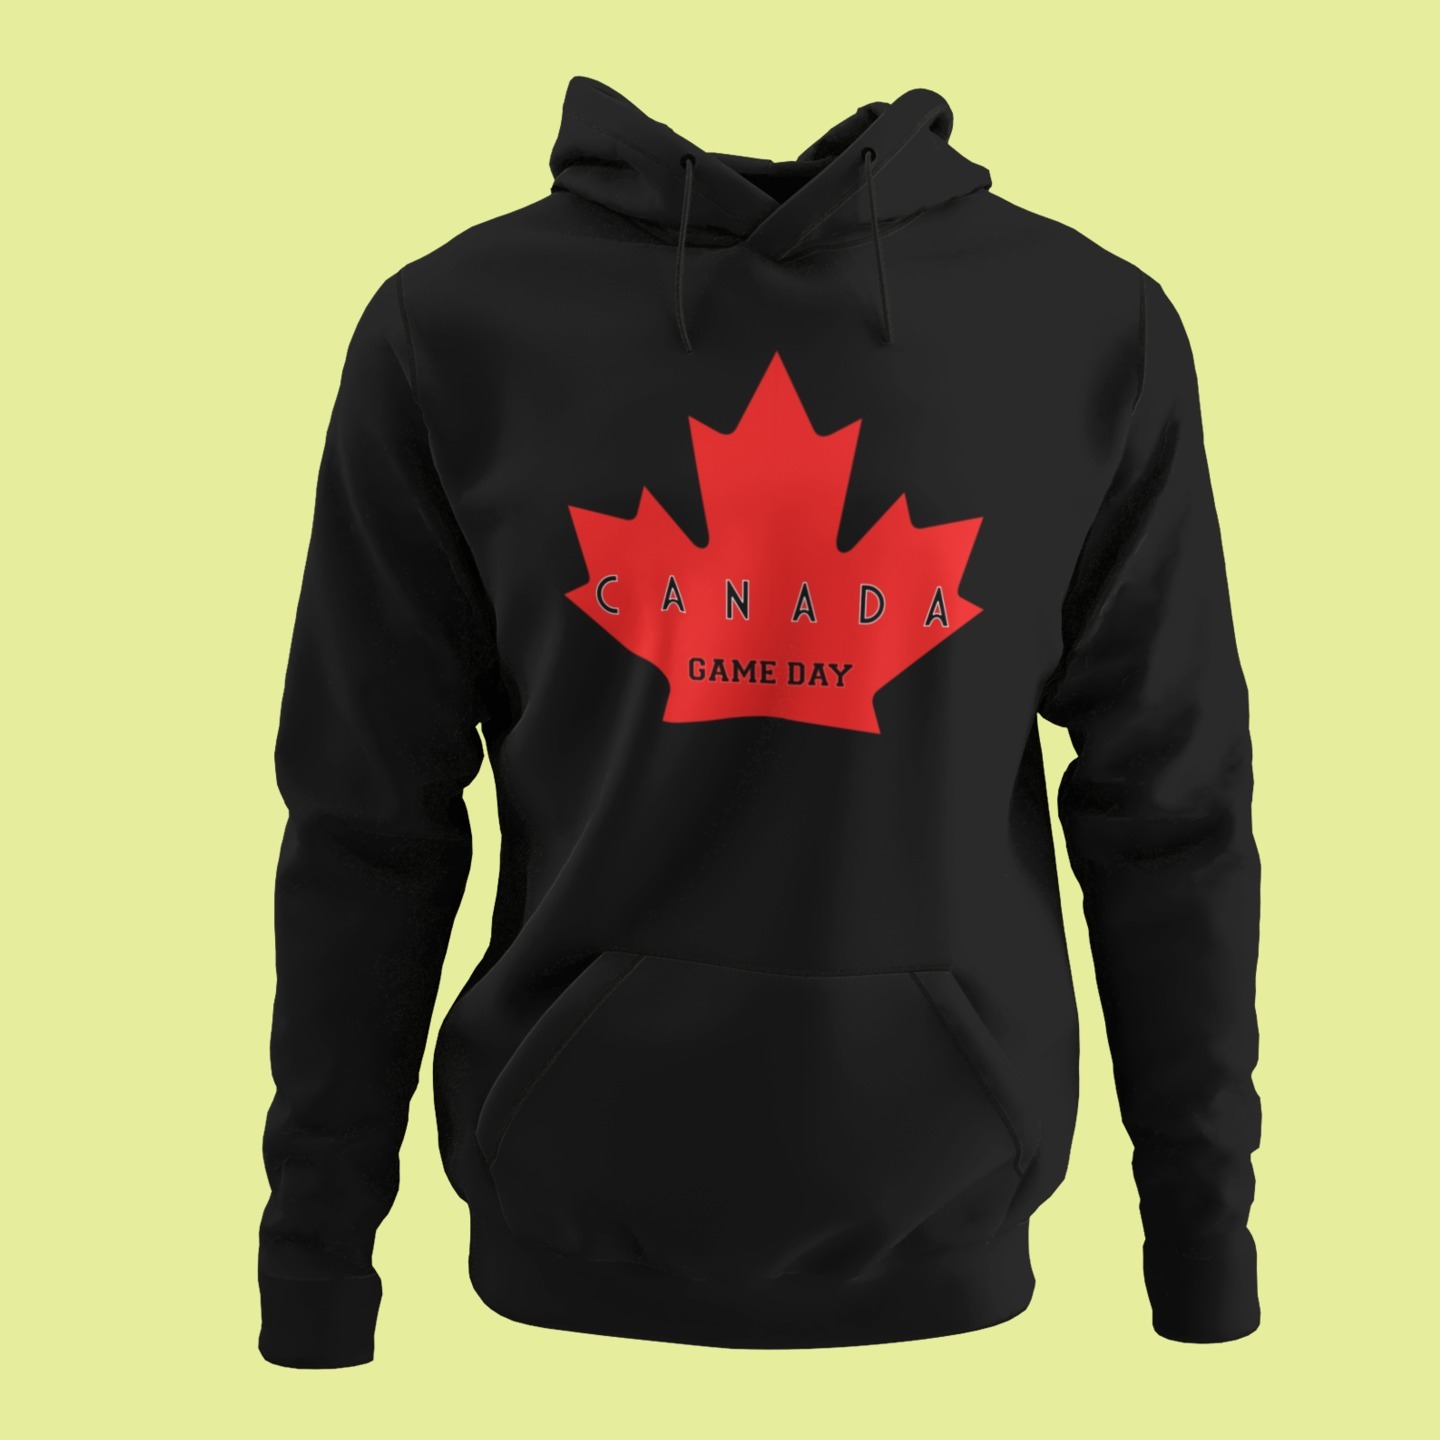 Canada Game Day Unisex Hoodie